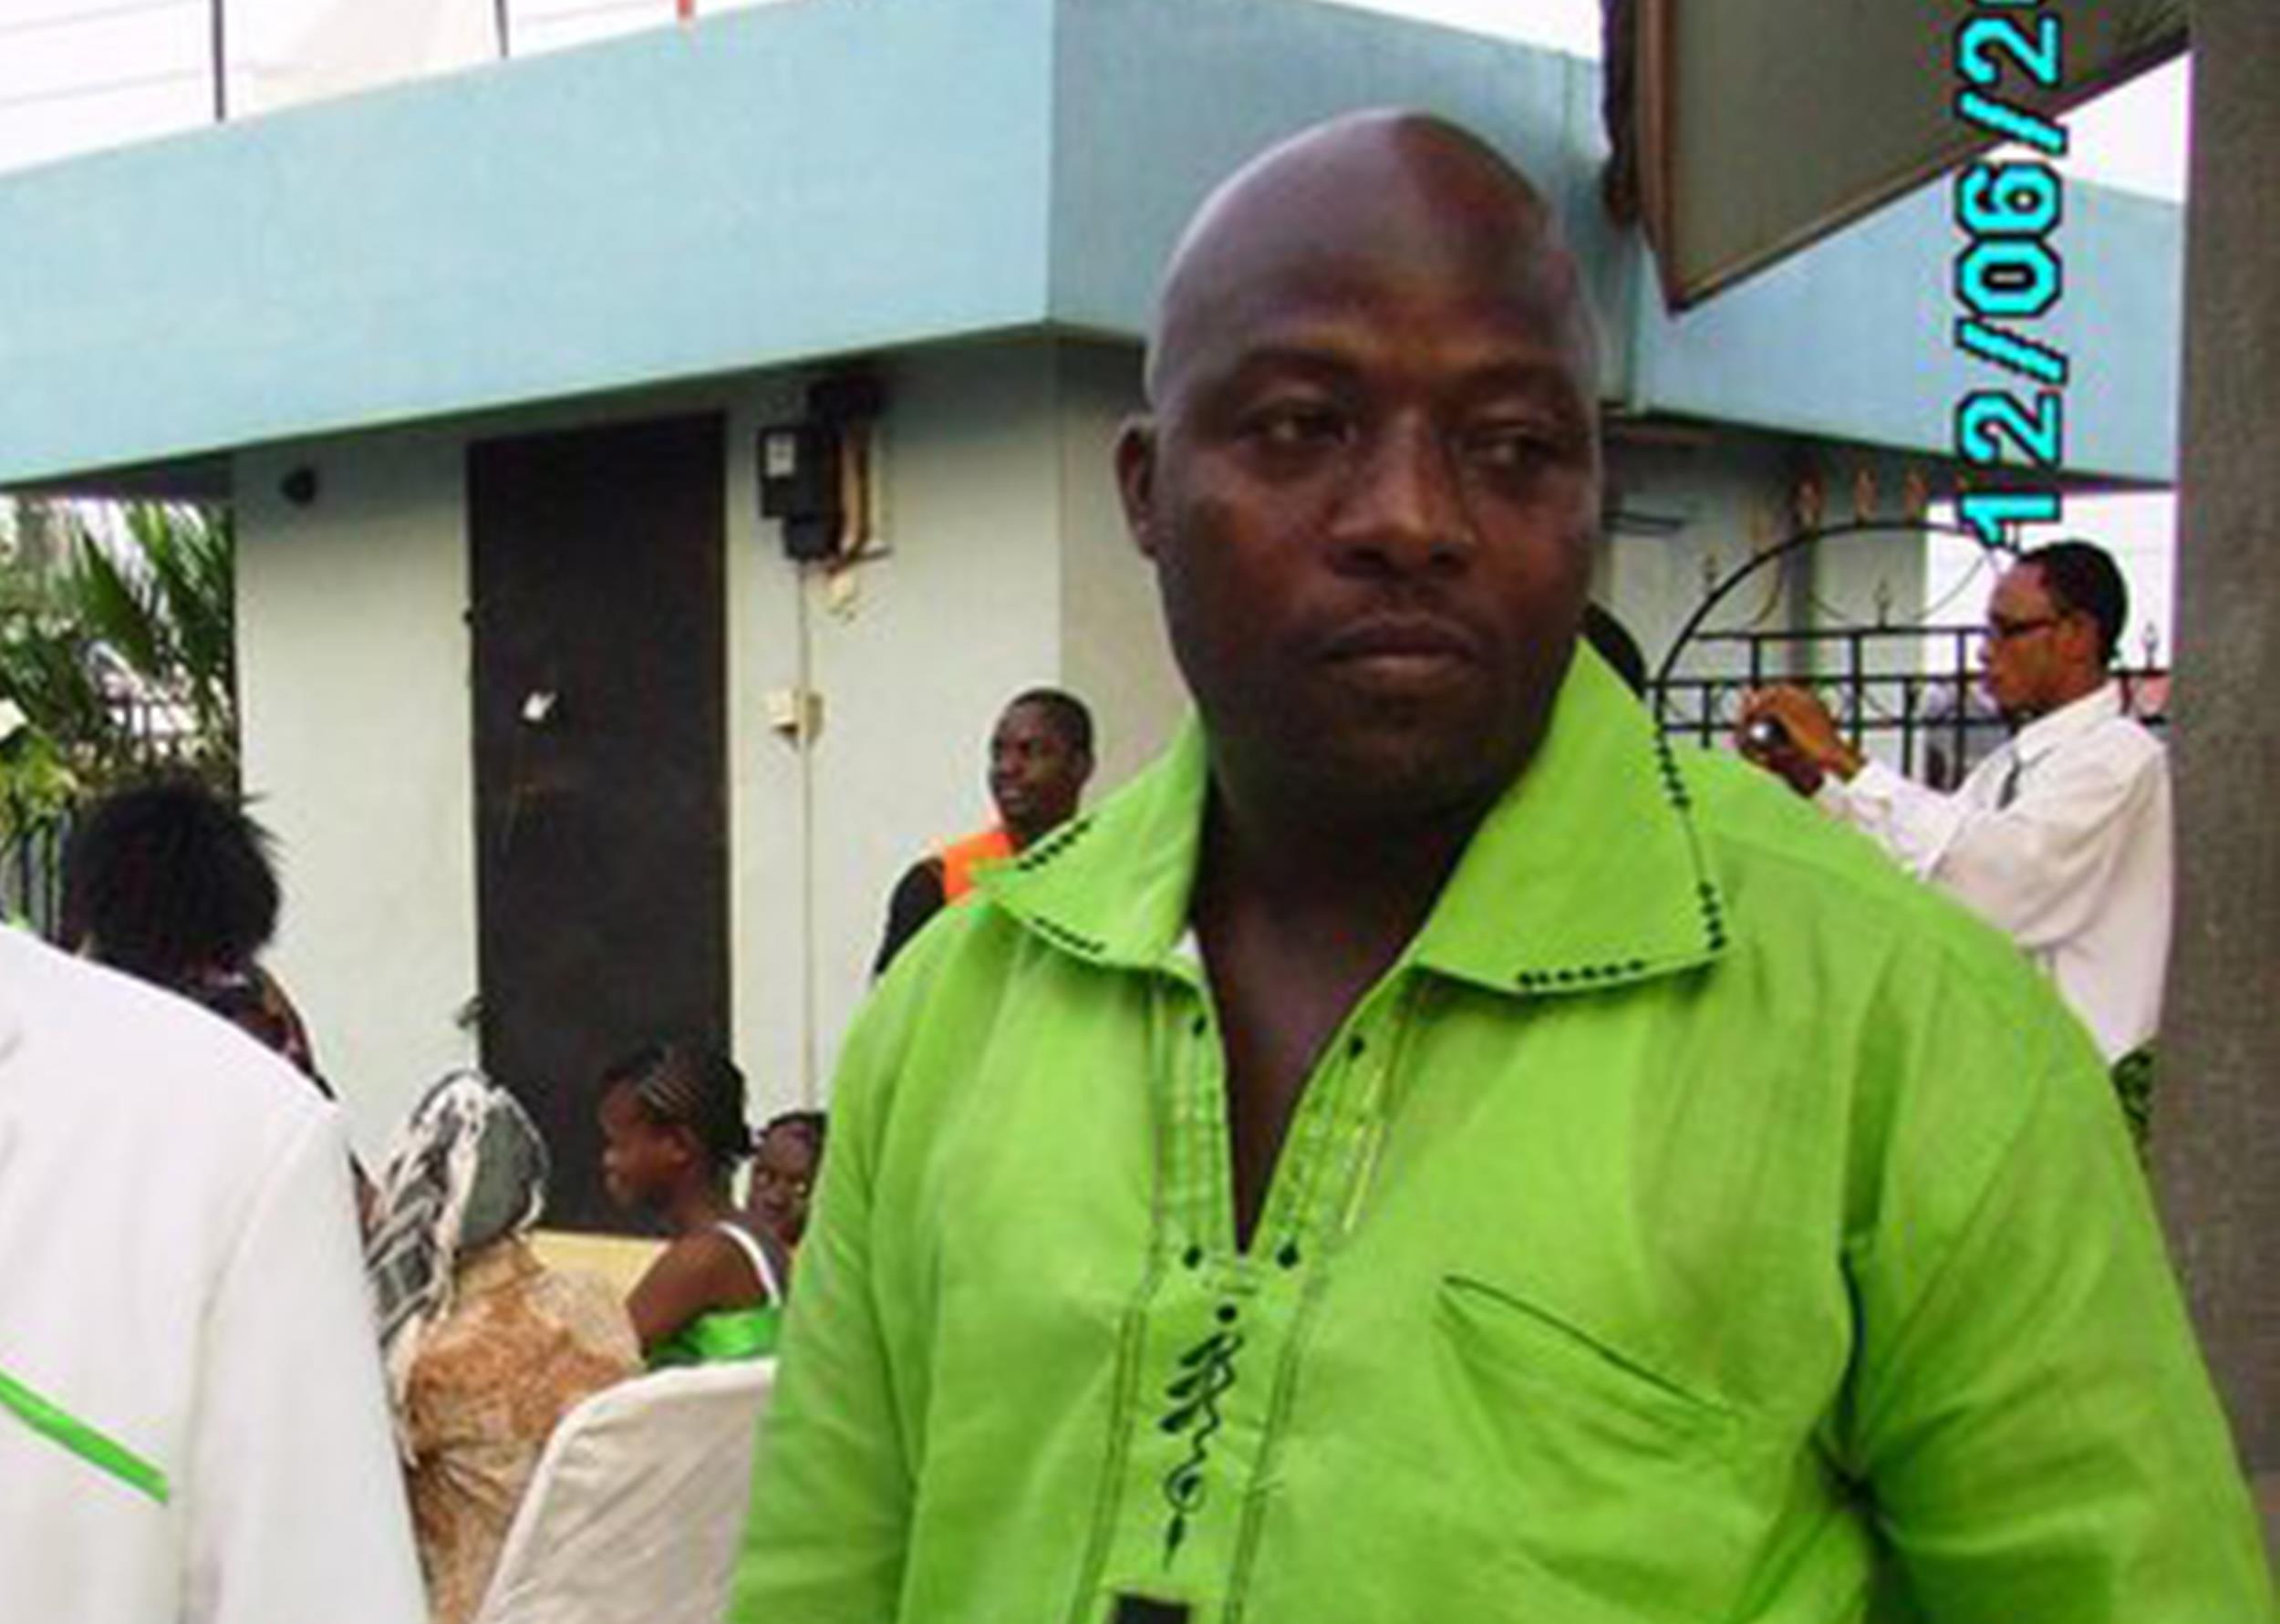 Thomas Eric Duncan, the first patient to be diagnosed with Ebola outside of Africa during the ongoing epidemic, is being treated at a Dallas hospital.